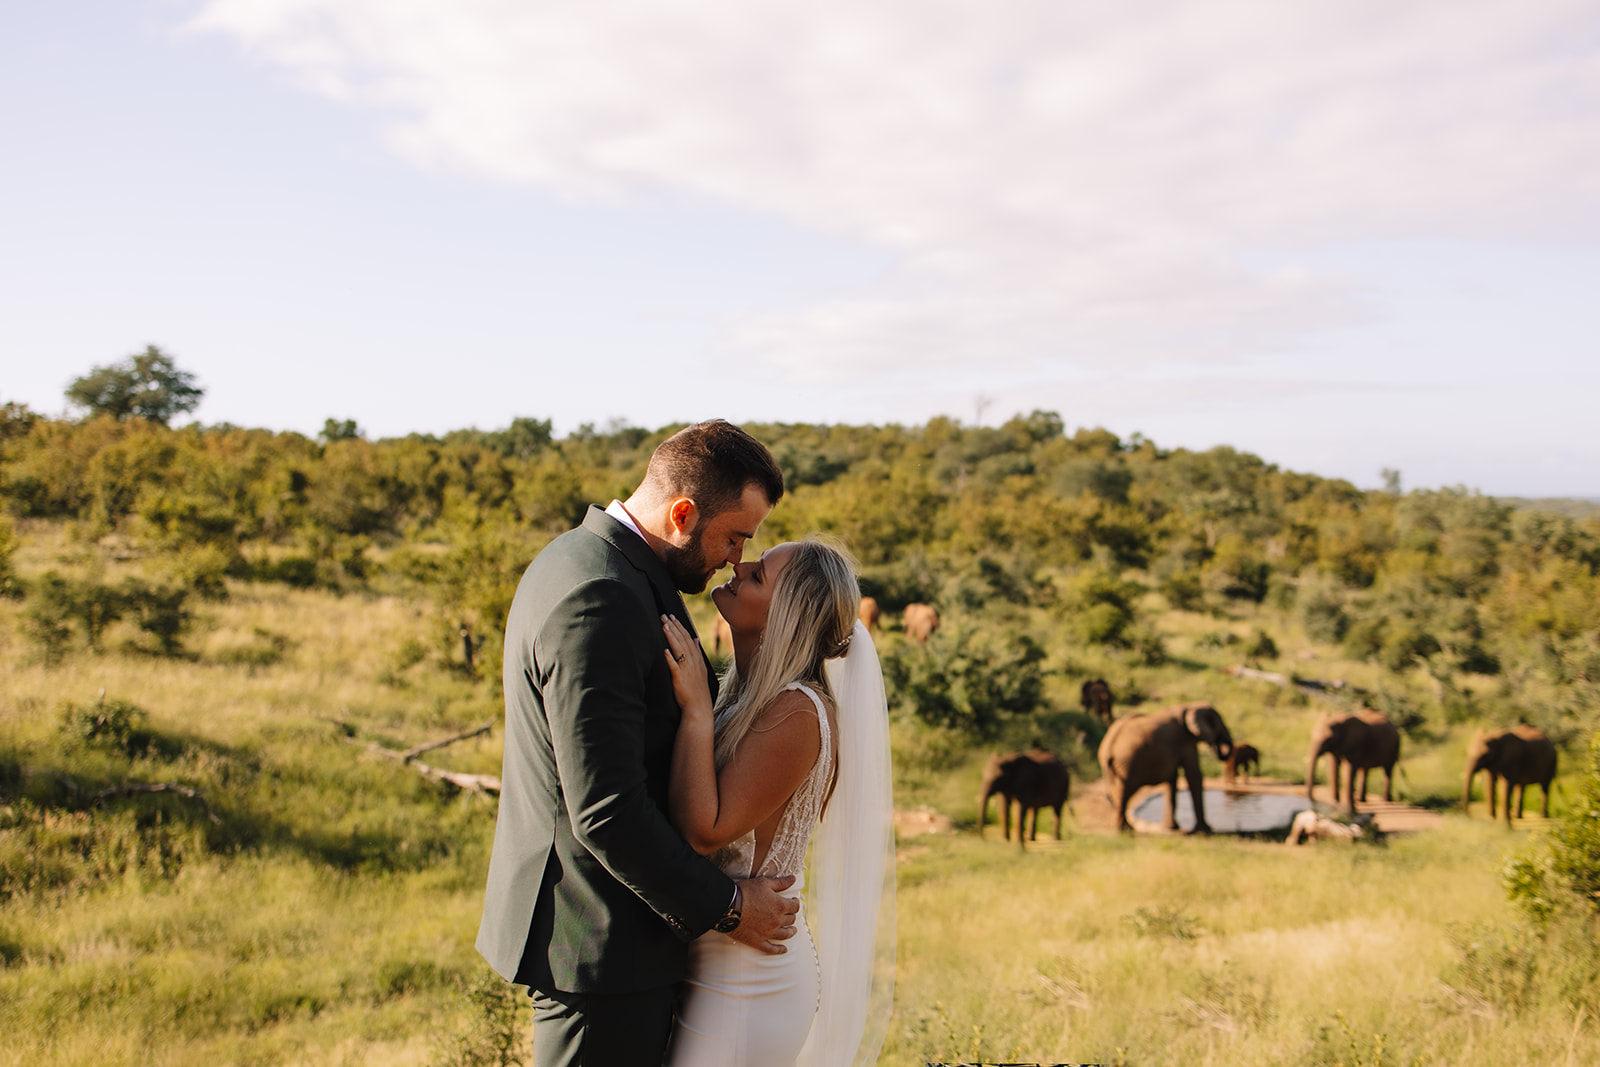 A bride and groom kiss outdoors at sunset, standing on a grass field with a river and trees in the background. The bride wears a white dress, and the groom wears a black suit and hat in south africa